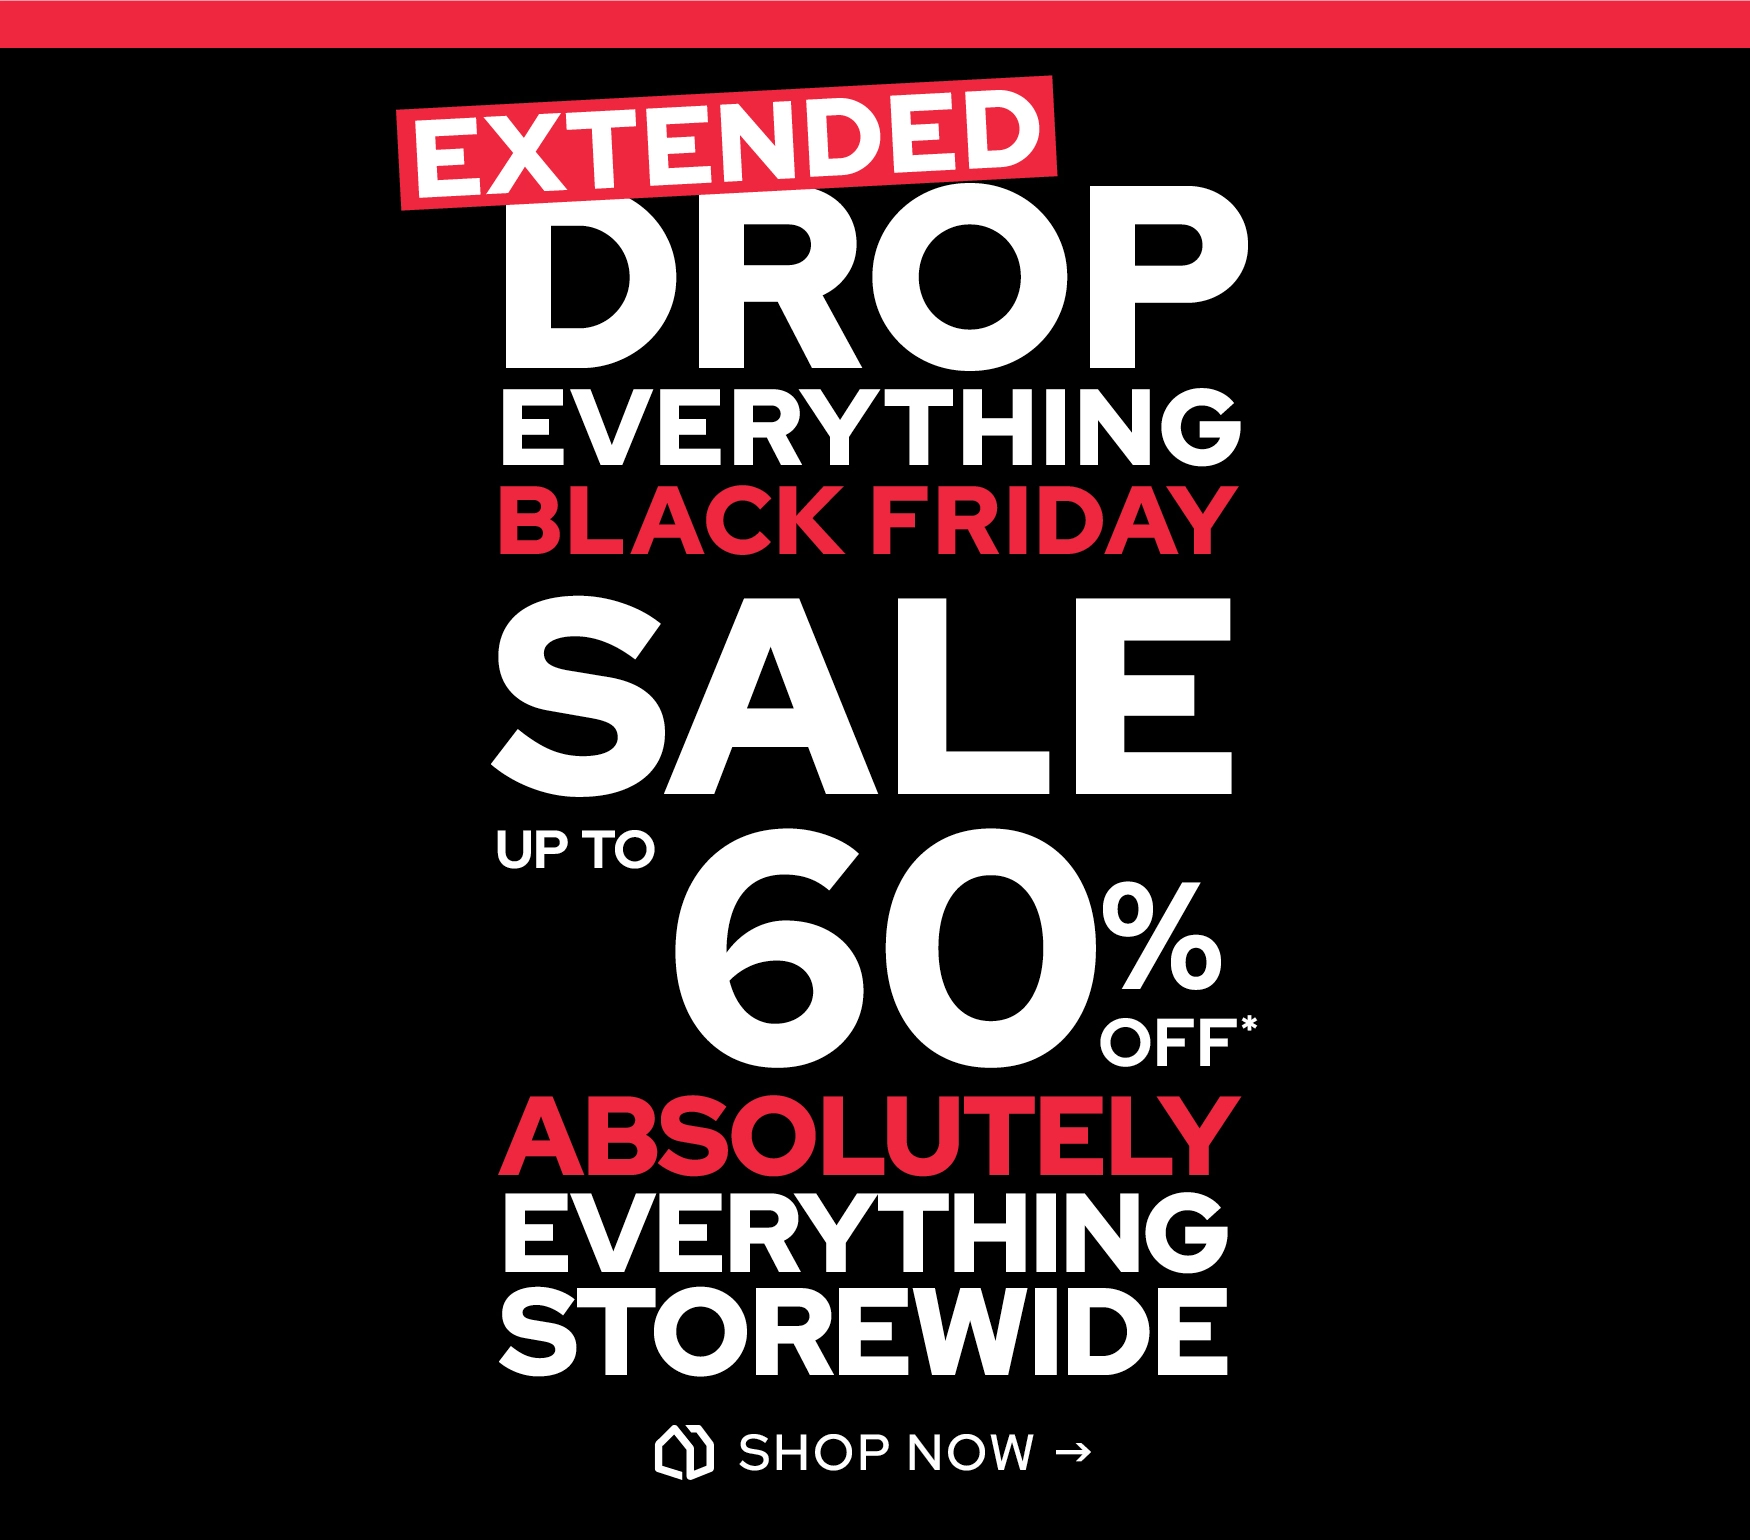 Absolutely Everything on Sale Up to 60% Off